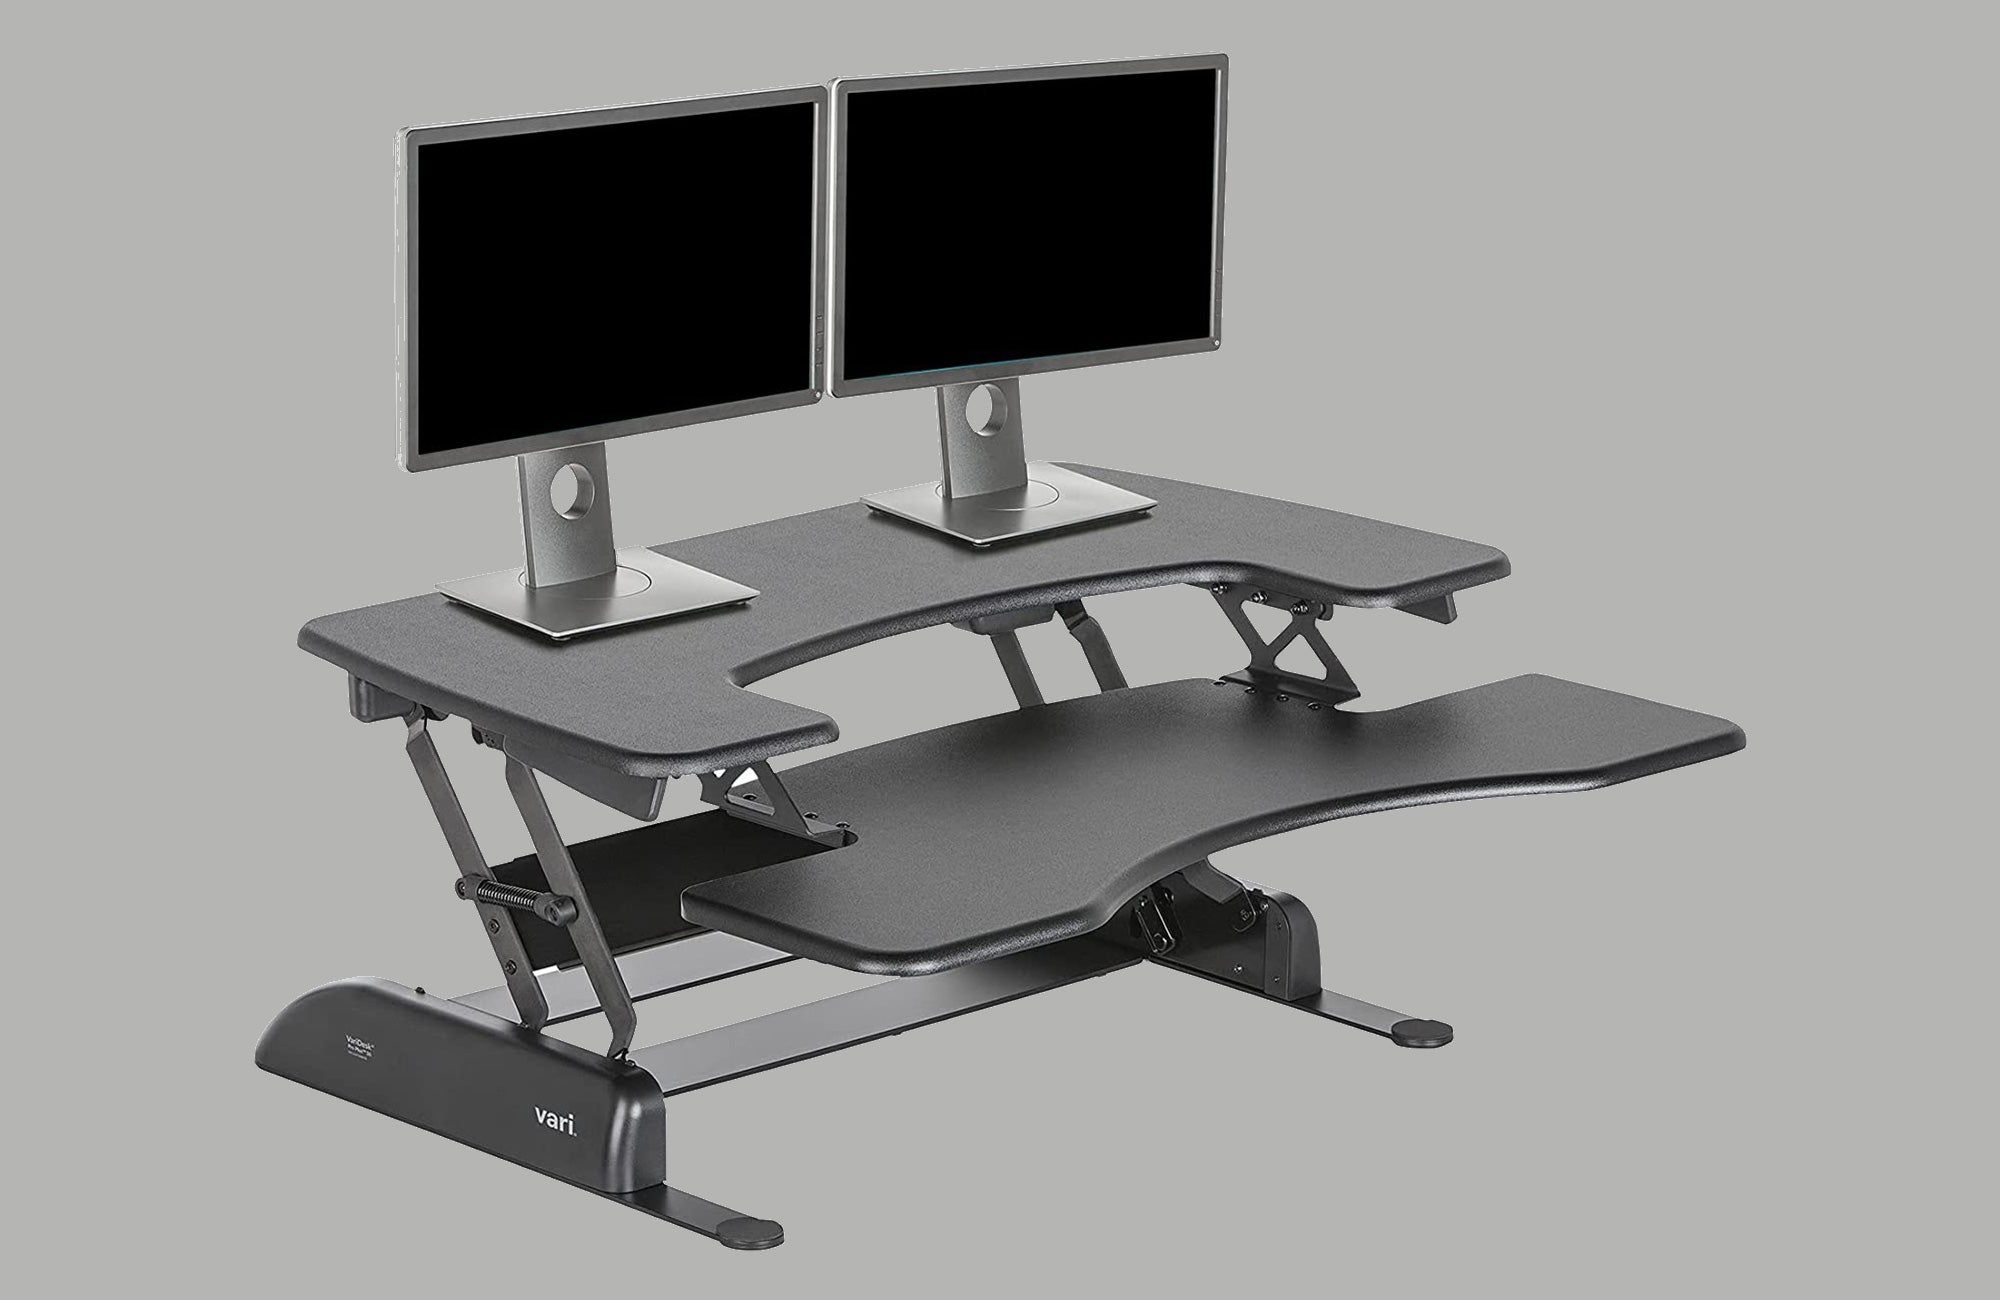 SEVEN WARRIOR Gaming Desk 60INCH with Power Outlet & Monitor Stand